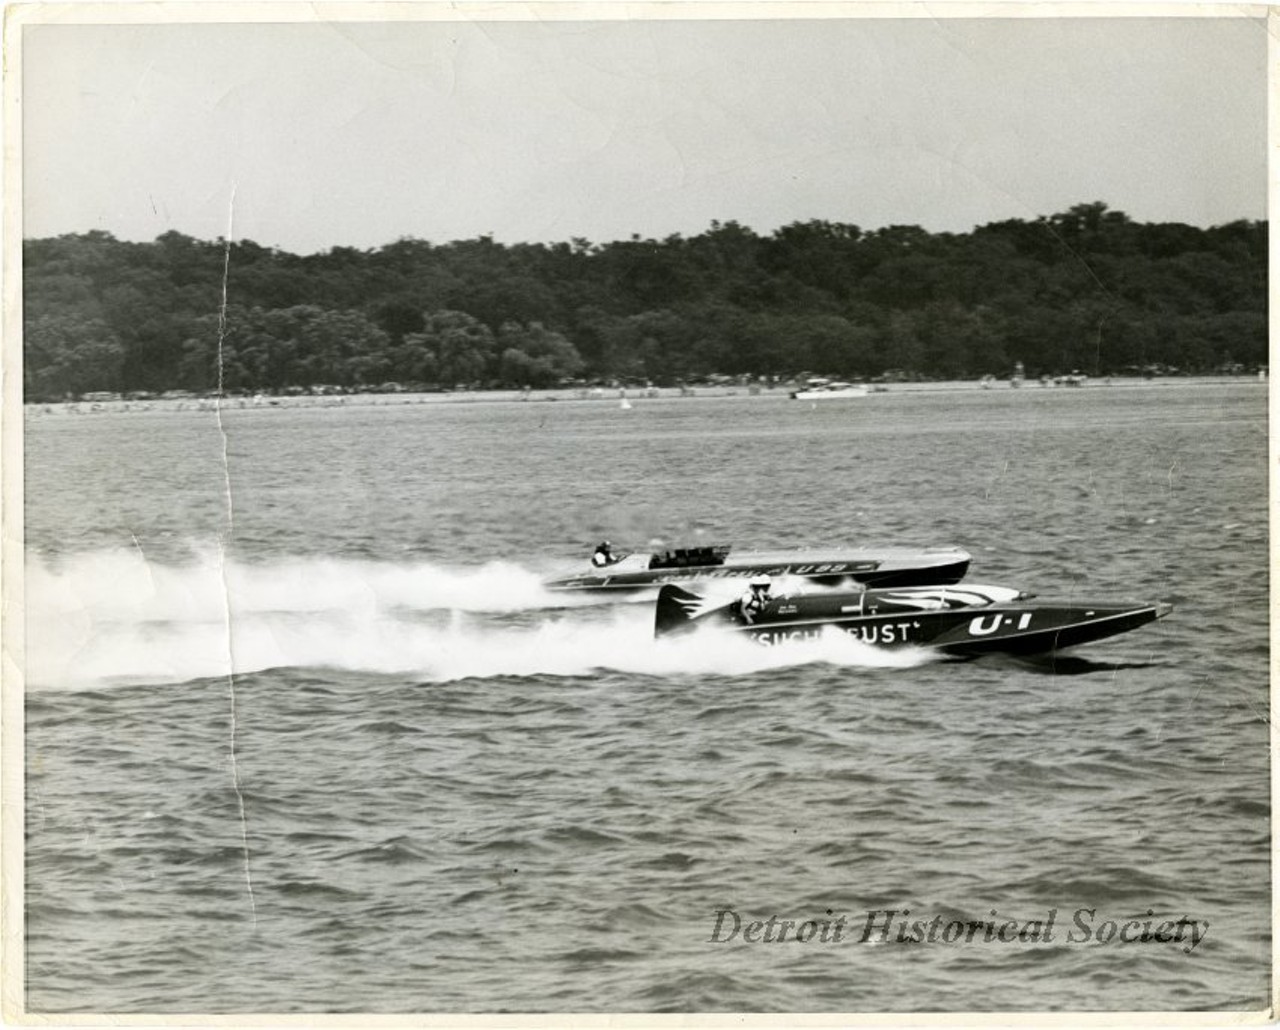 "Black and white photo of MISS PEPSI (U-99) background, and SUCH CRUST (U-1) foreground, racing on the Detroit River. The Belle Isle shoreline can be seen in the background. On the verso is the name Ray Moore and the notation - "start of 2nd heat." The back of the photo is also marked "Detroit Times, July 4, 1949." The Detroit Memorial Race was held on July 4th in 1949."